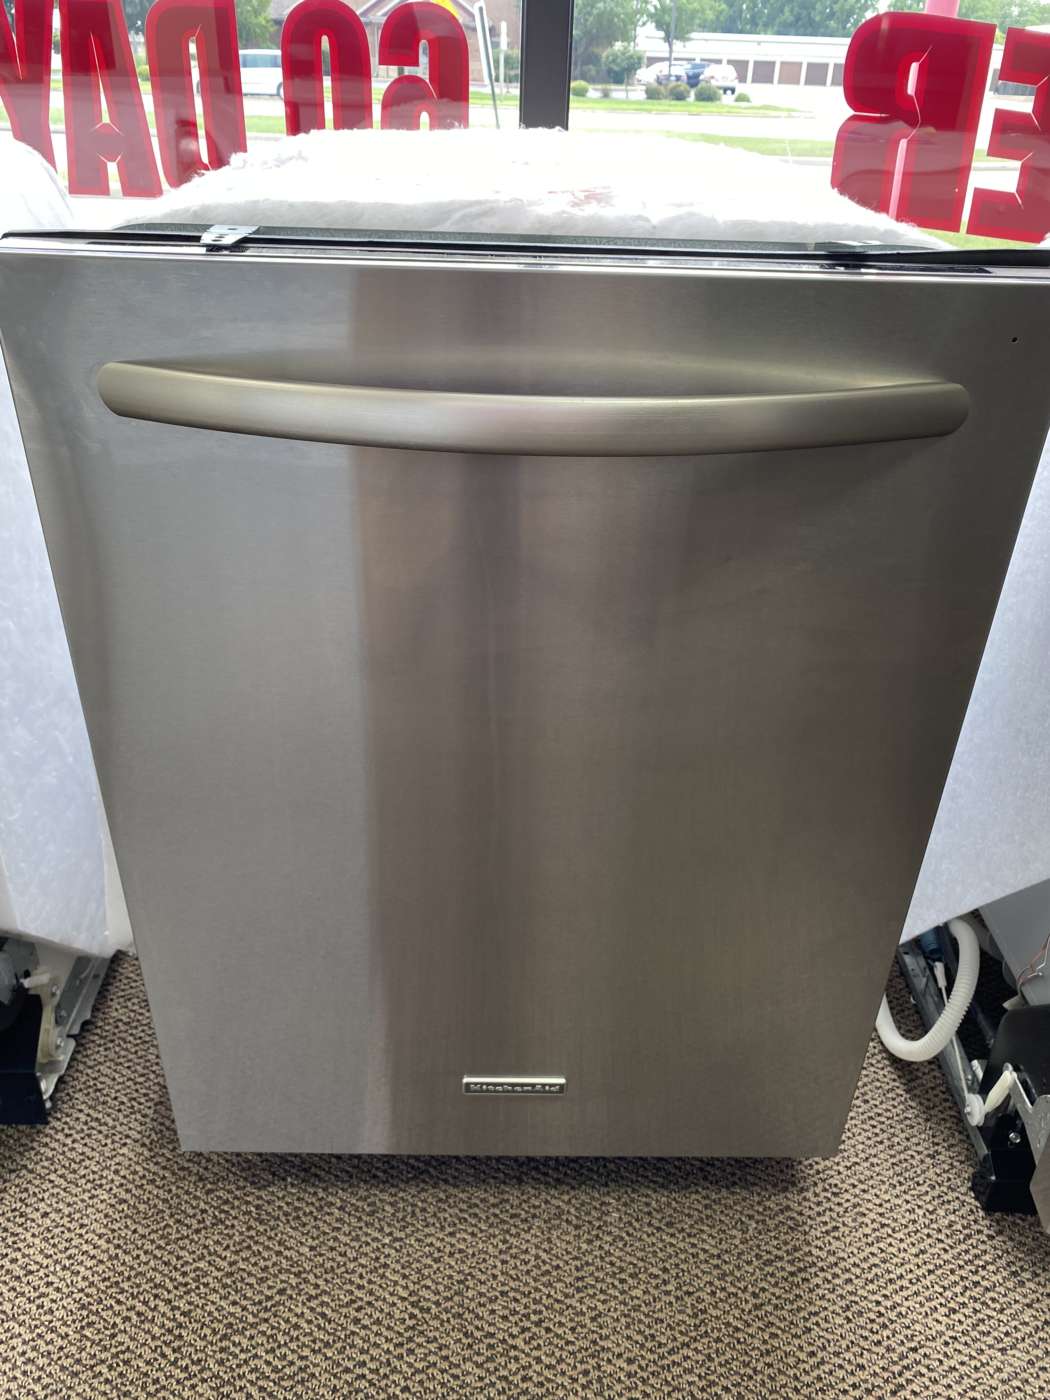 Reconditioned KITCHENAID Stainless-Tub Built-In Dishwasher – Stainless